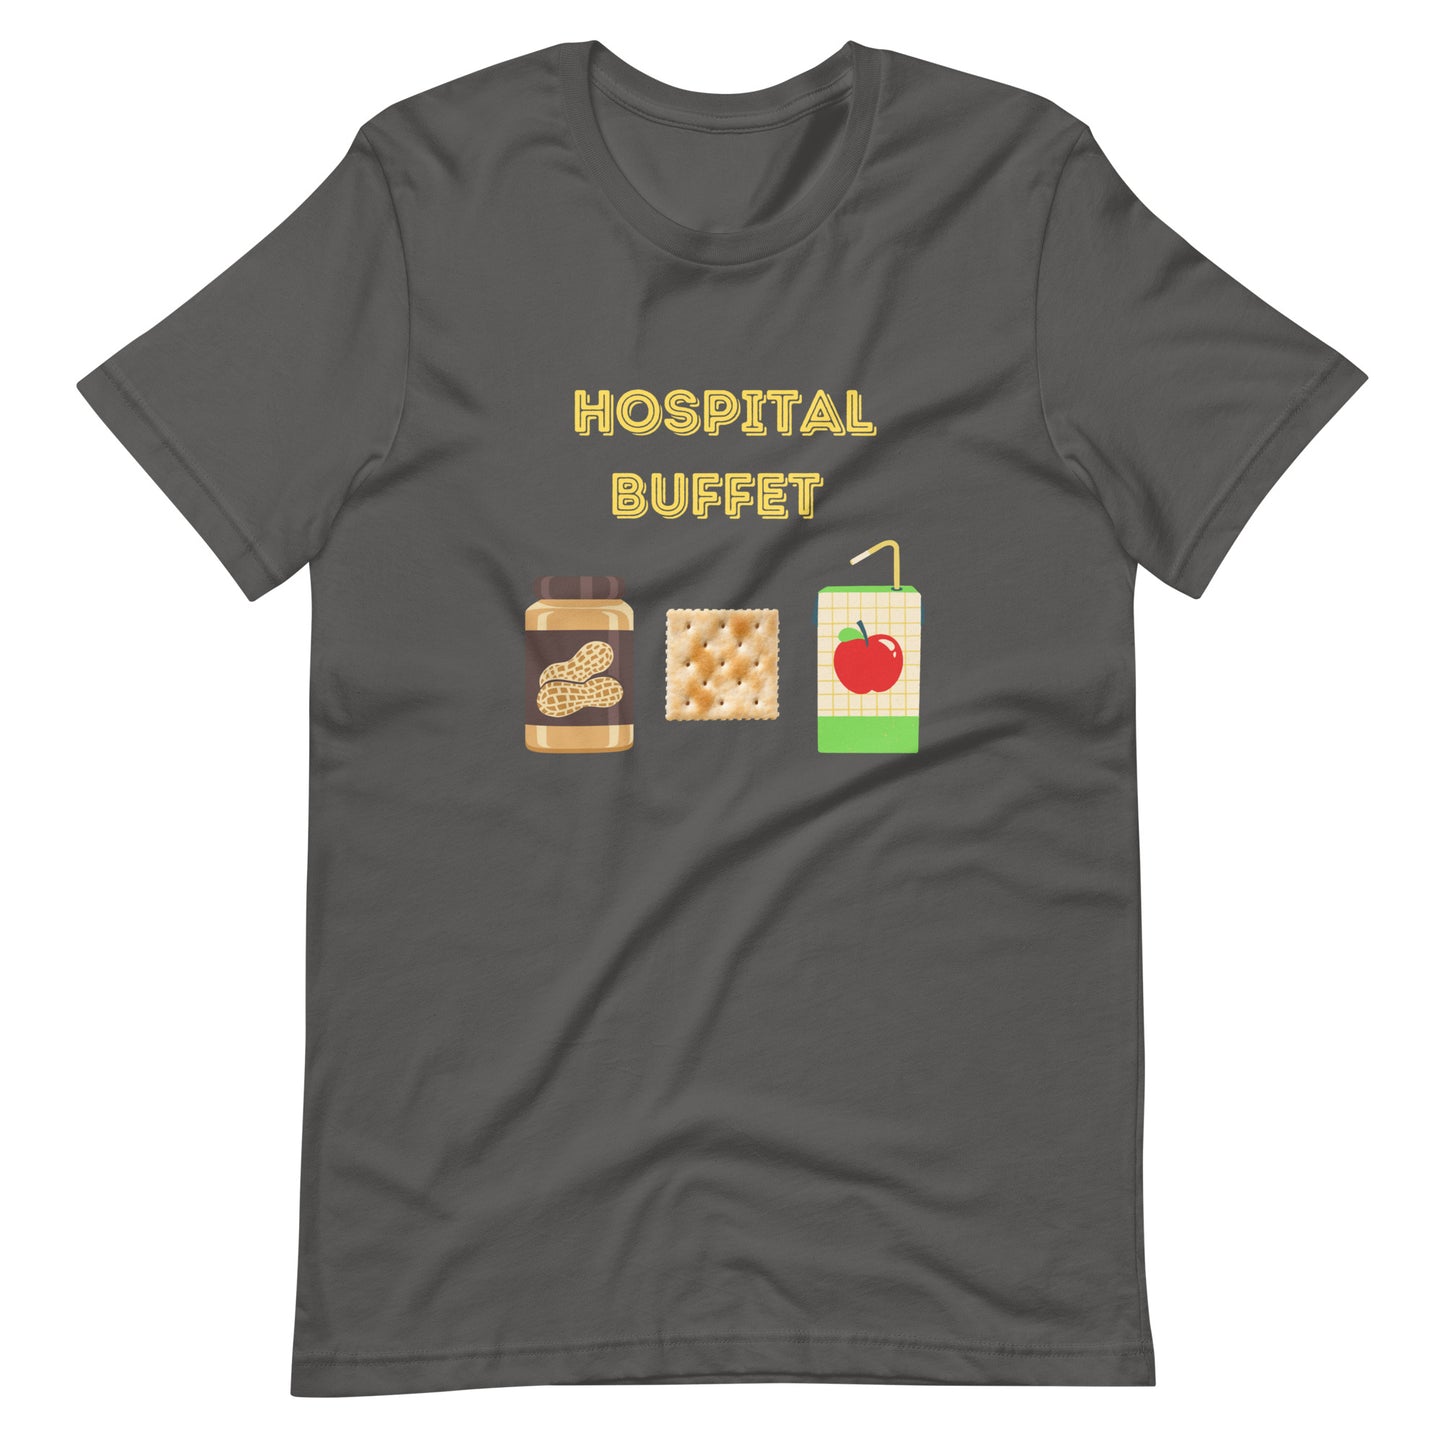 Graphic Tee, Hospital Buffet, Funny Doctor Shirt, Medical Student, Funny Nurse Shirt, Funny Resident Shirt, Doctor, Physician, Resident, Nurse, PA, NP, Medical Student